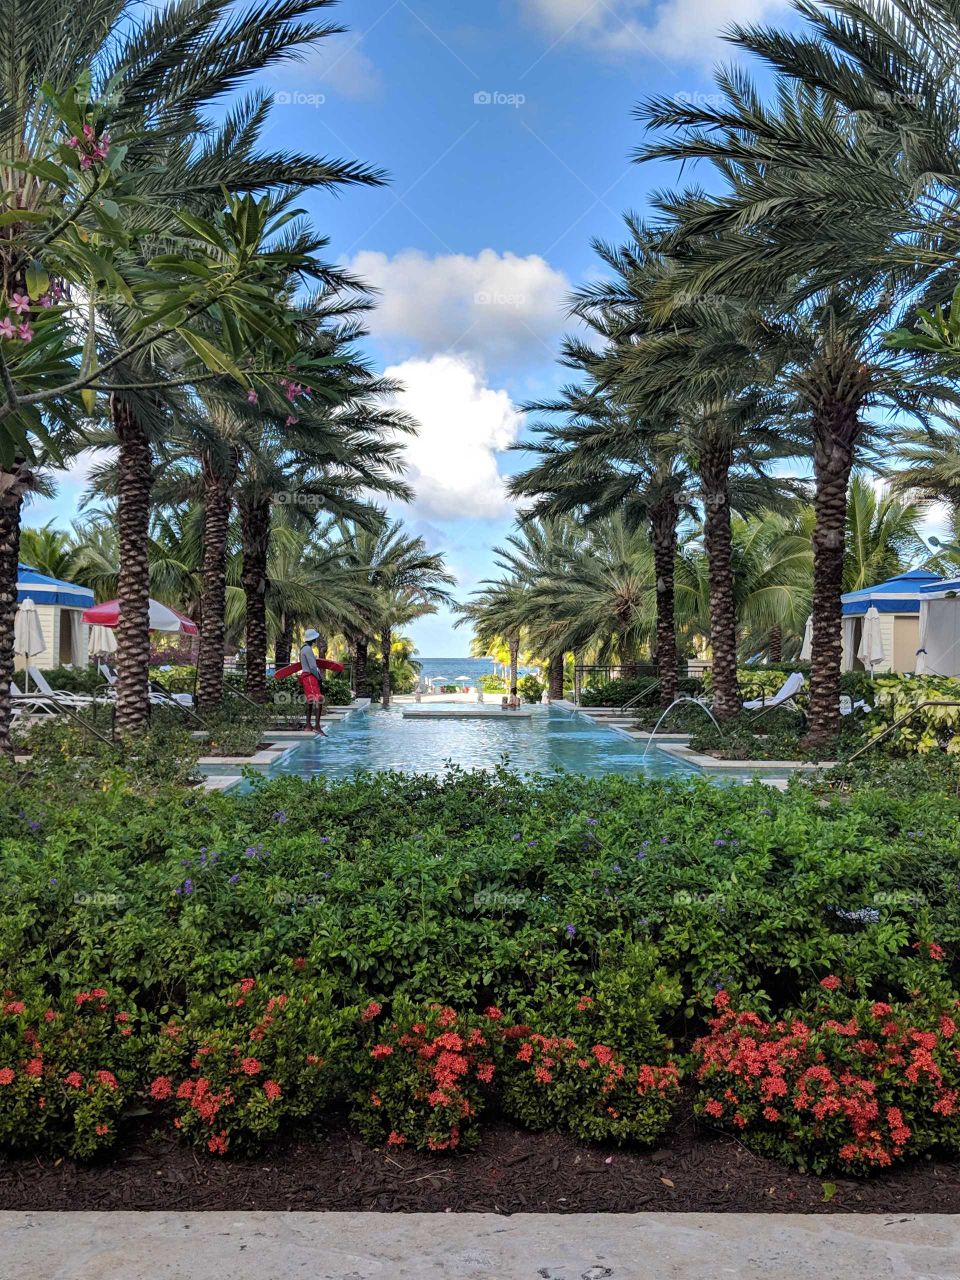 Resort views in The Bahamas. Palm trees, flowers, outdoor pool, beach side